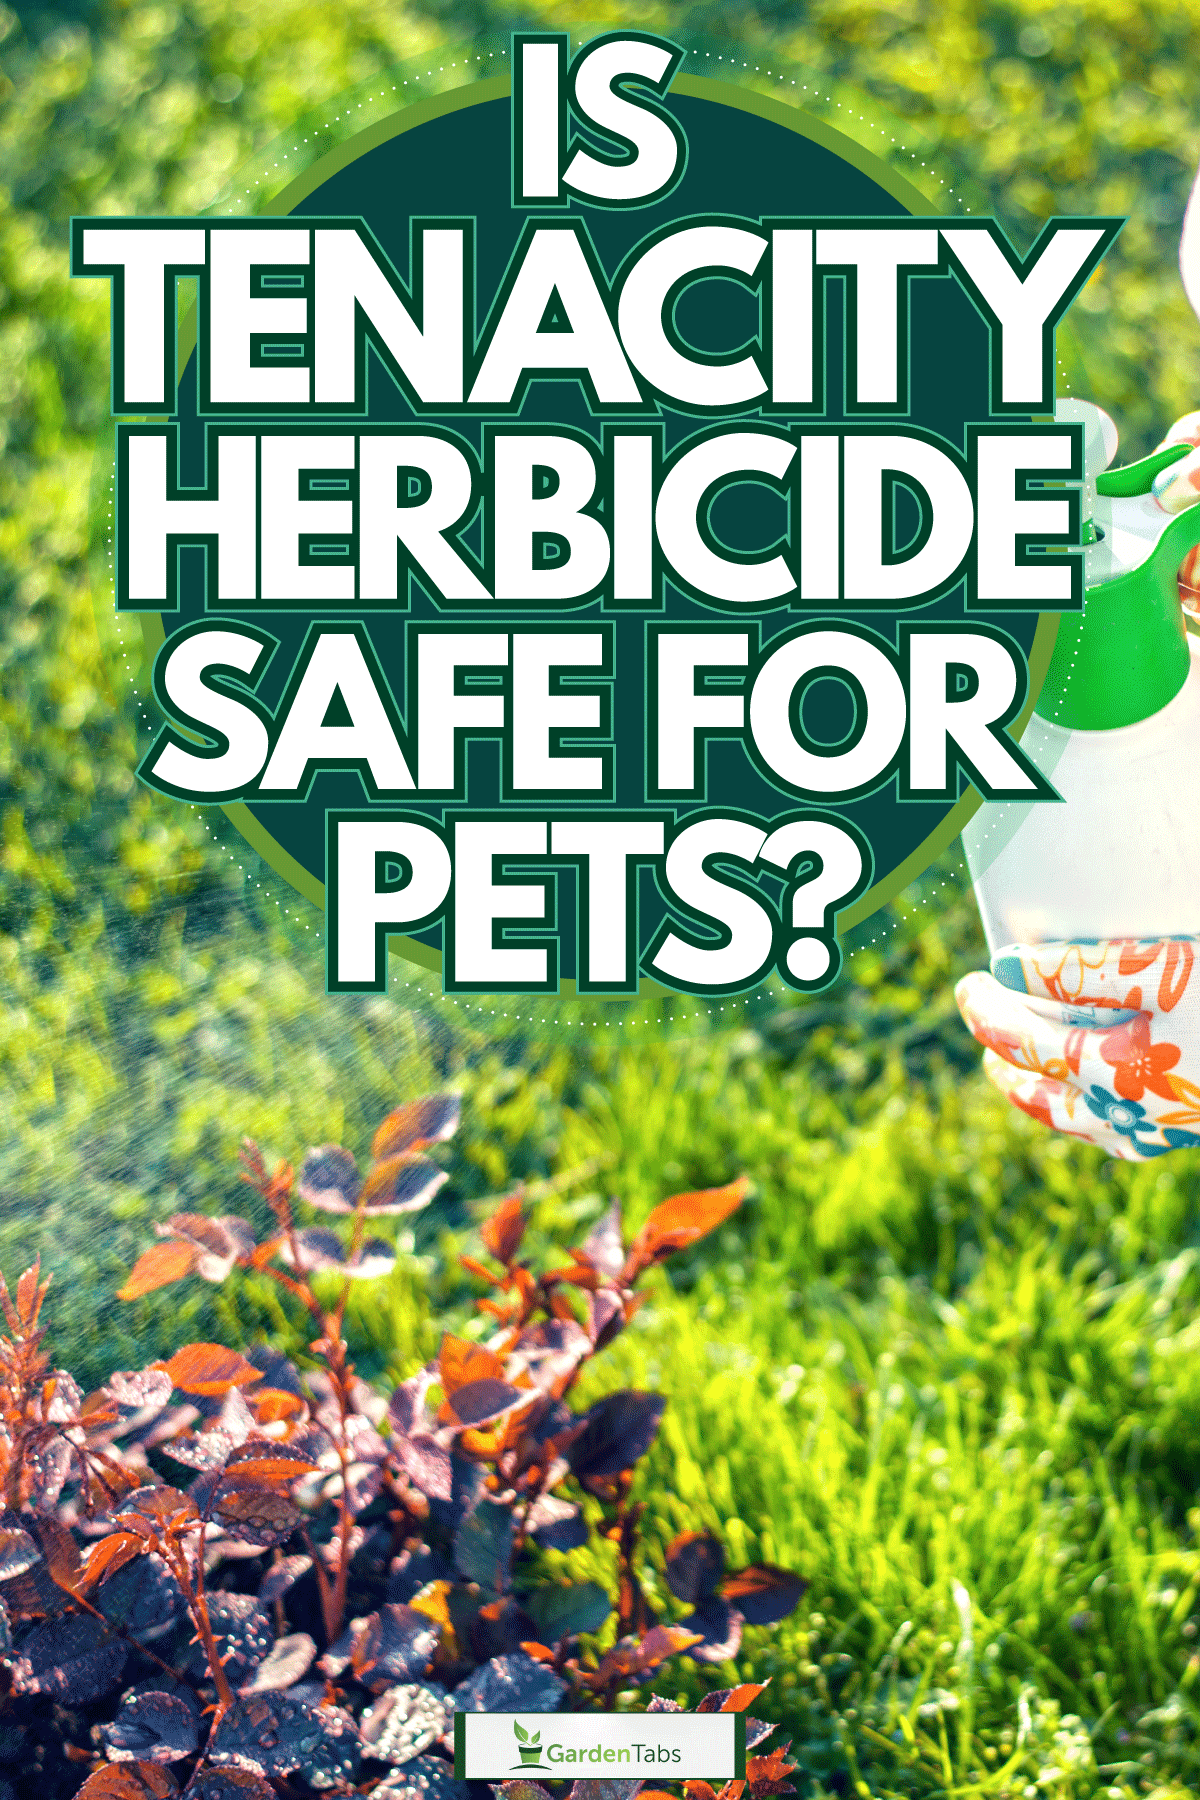 Gardener spraying herbicide on the plants, Is Tenacity Herbicide Safe For Pets?